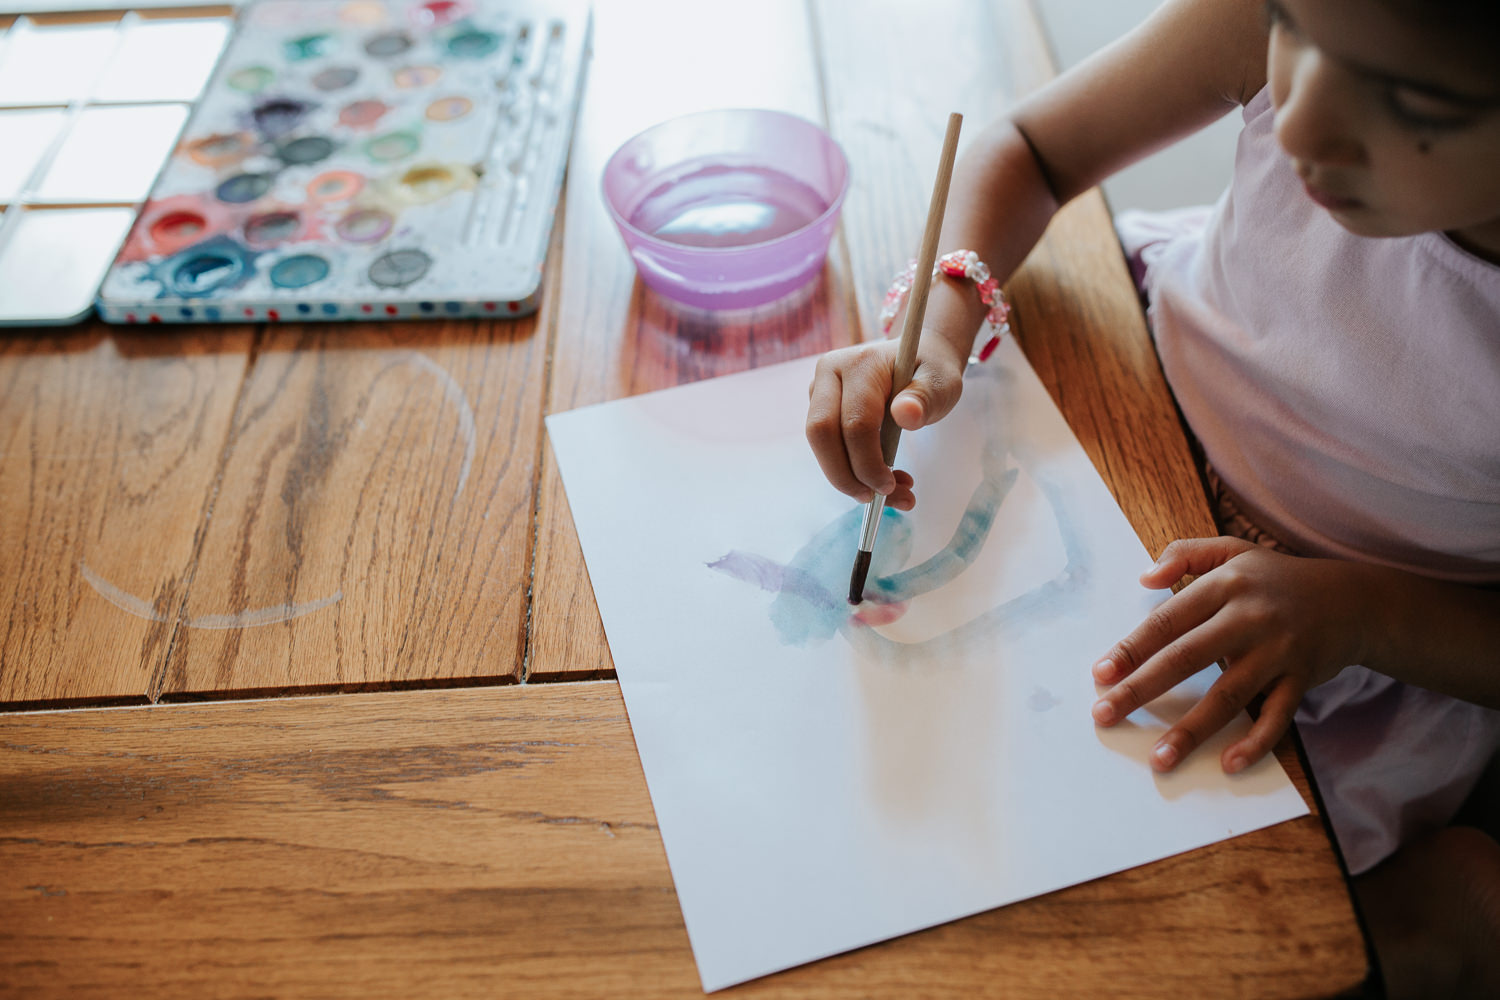 4 year old toddler girl with dark hair in pigtails wearing purple dress sitting at kitchen table painting with watercolours - Stouffville Lifestyle Photos